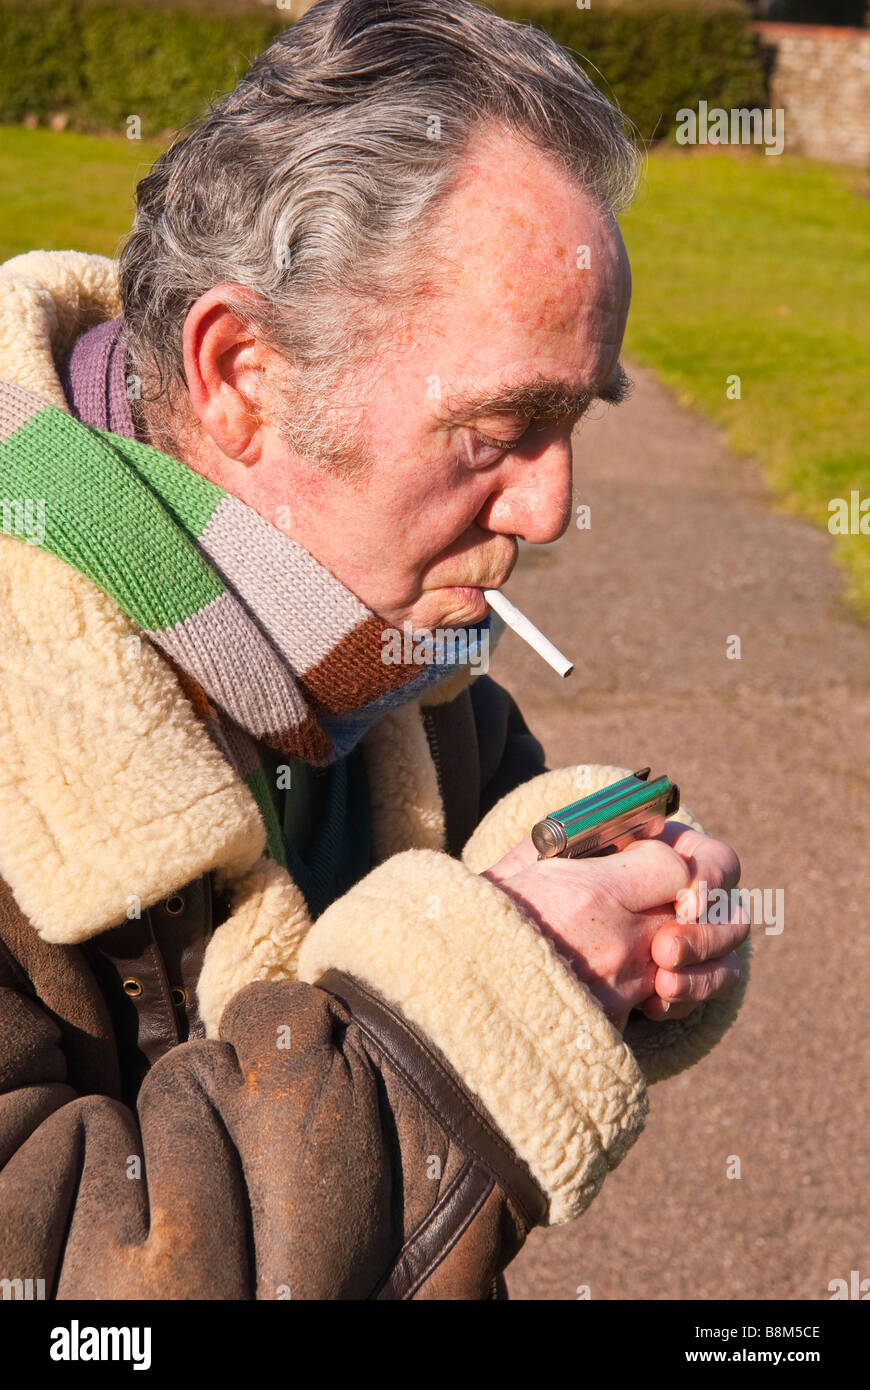 Elderly man lighting his roll up cigarette outdoors ready for smoking Stock Photo